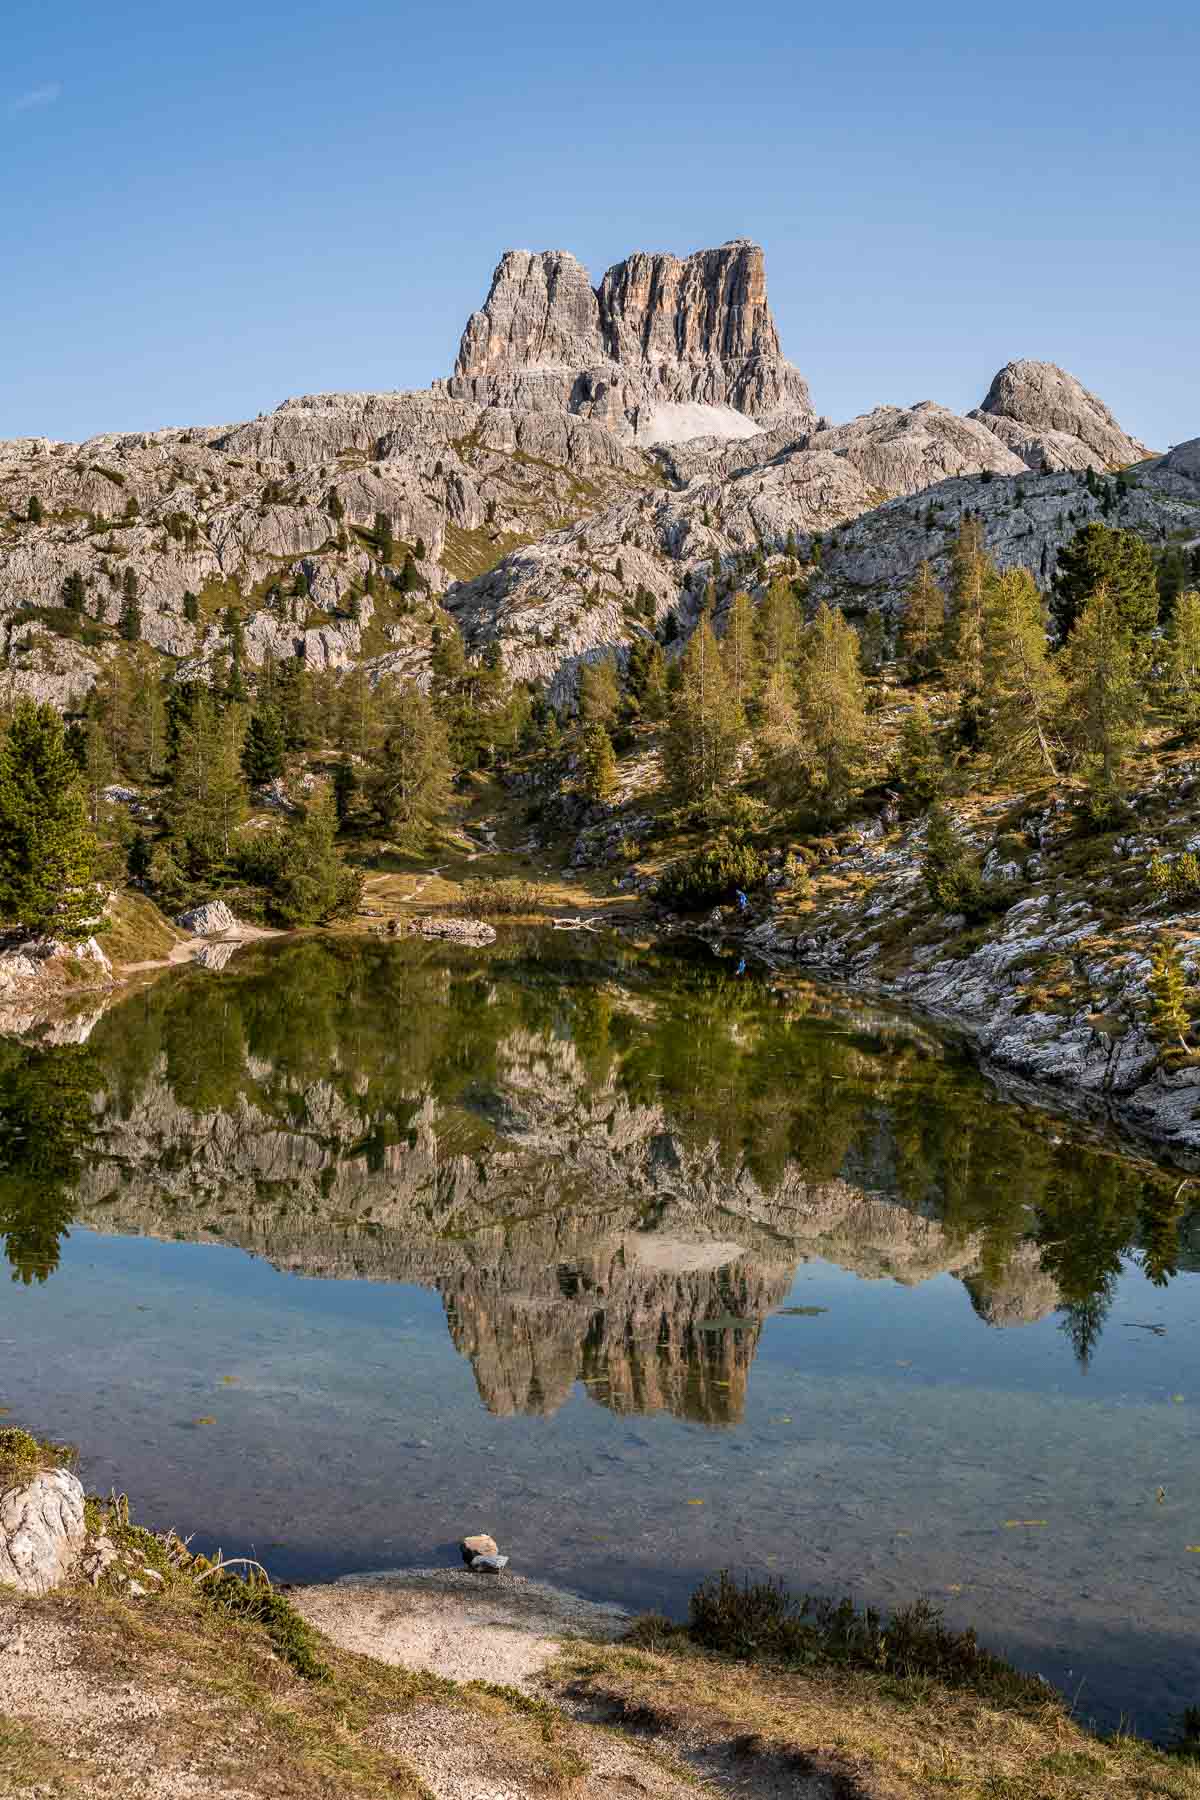 Reflections in Lago di Limides in the Dolomites